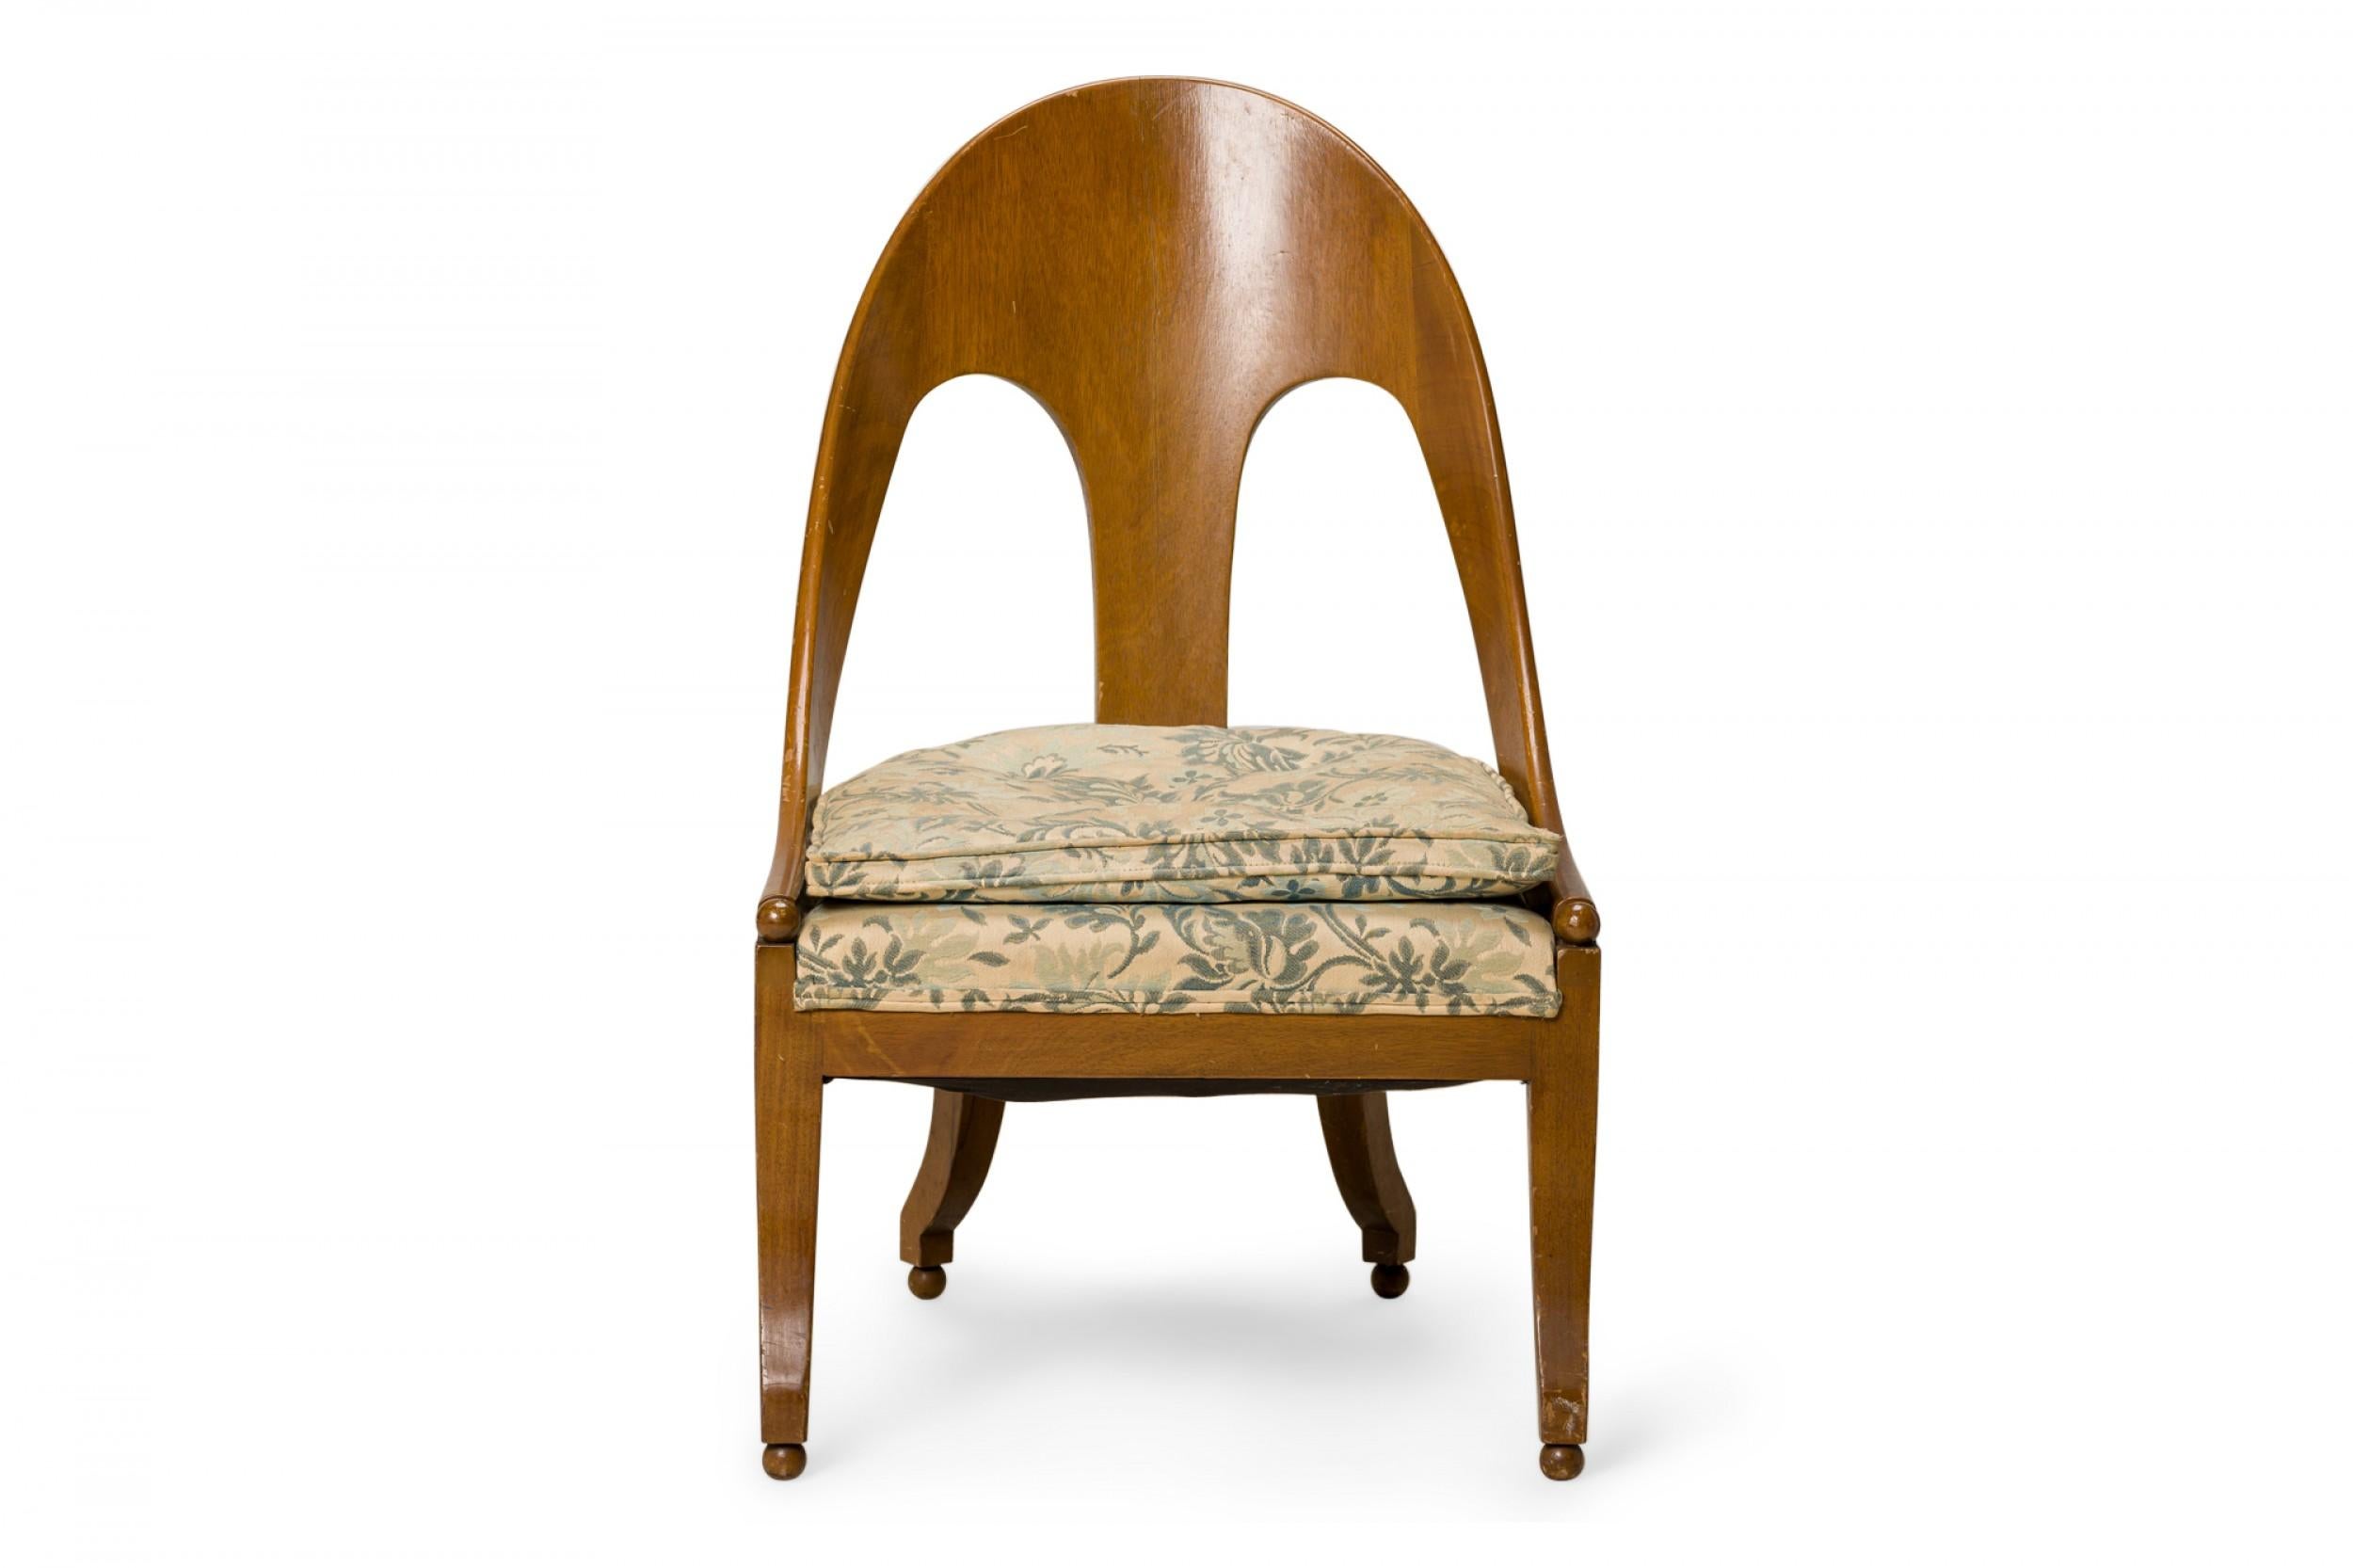 American Mid-Century spoon back side / pull up chair with a walnut frame and a floral beige and blue fabric upholstered seat, resting on four square curved legs ending in ball feet. (Similar pieces: DUF0427-DUF0431)